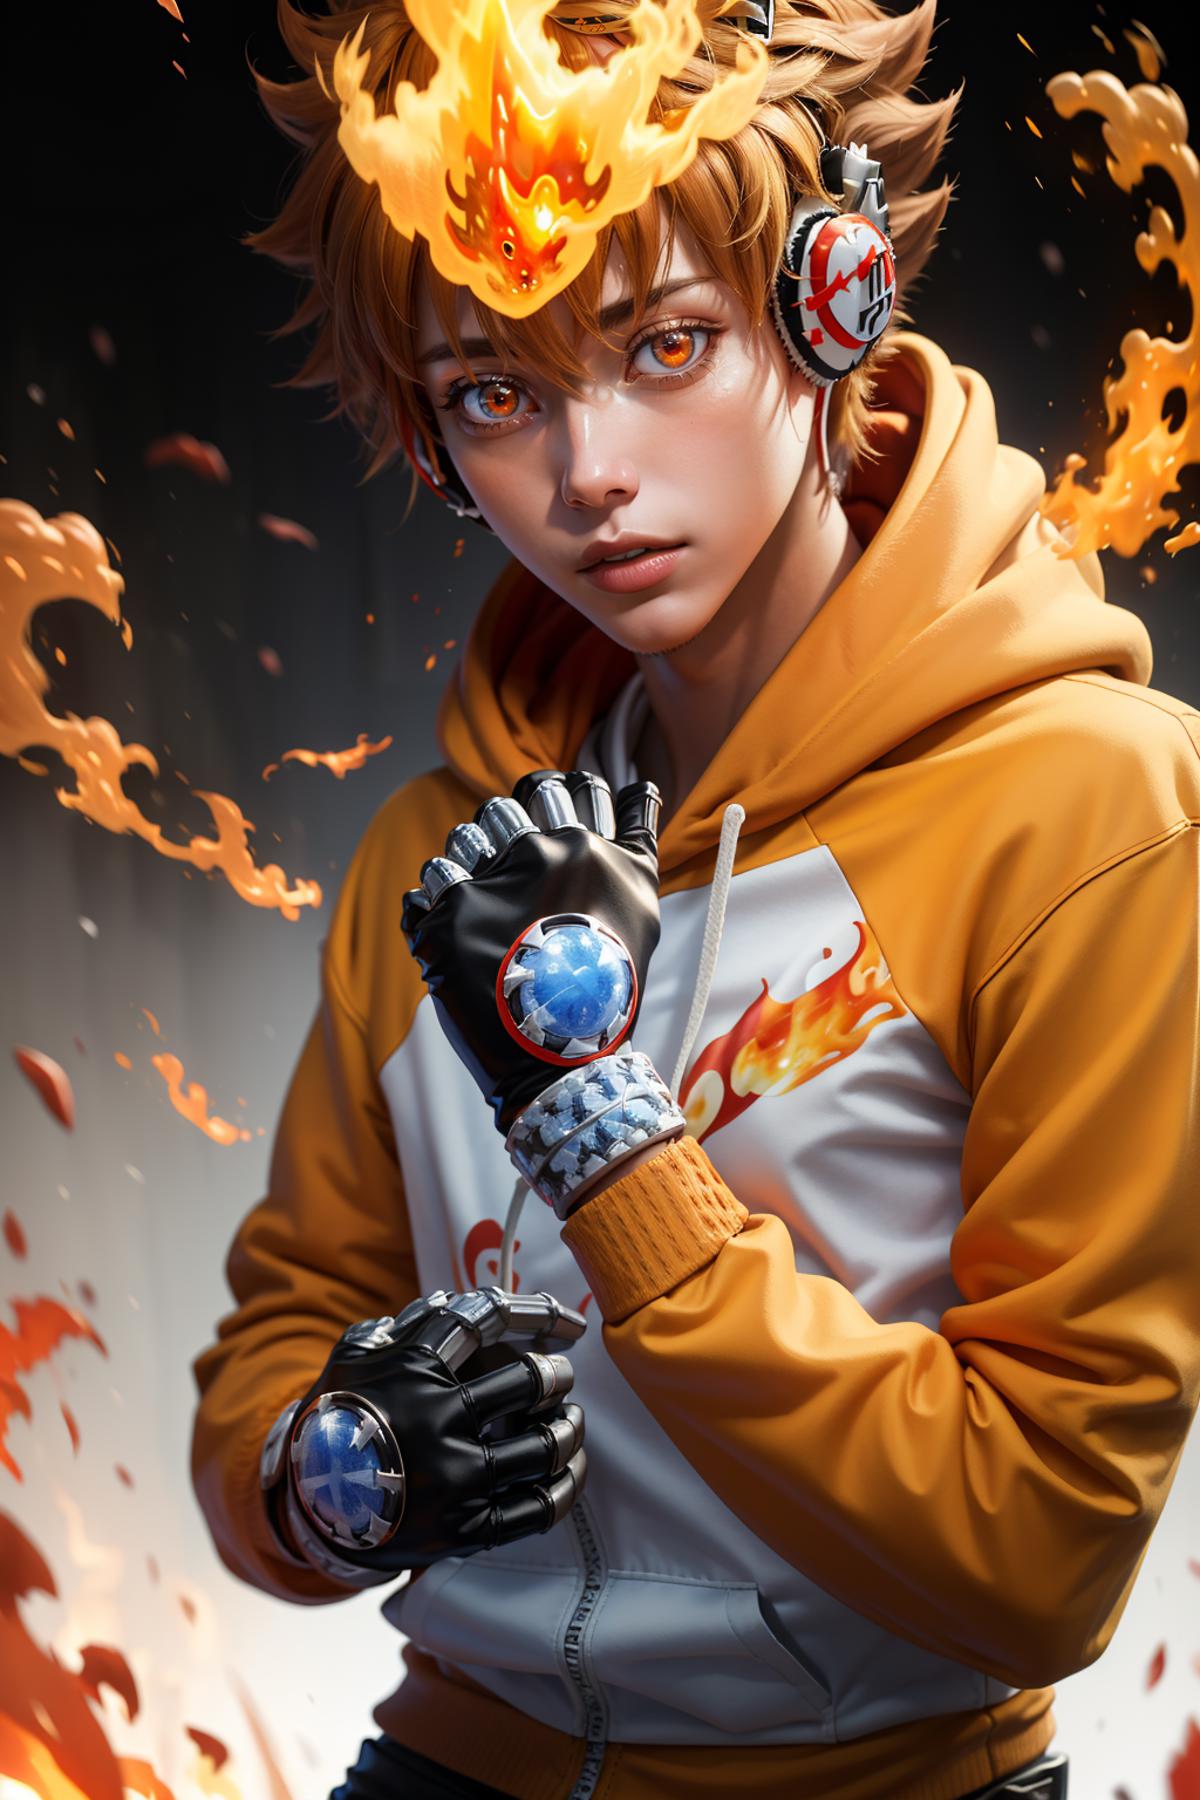 A computer-generated image of a person wearing a hoodie, with a red-haired head and yellow sweater, holding a glove with a blue and red circle on it.